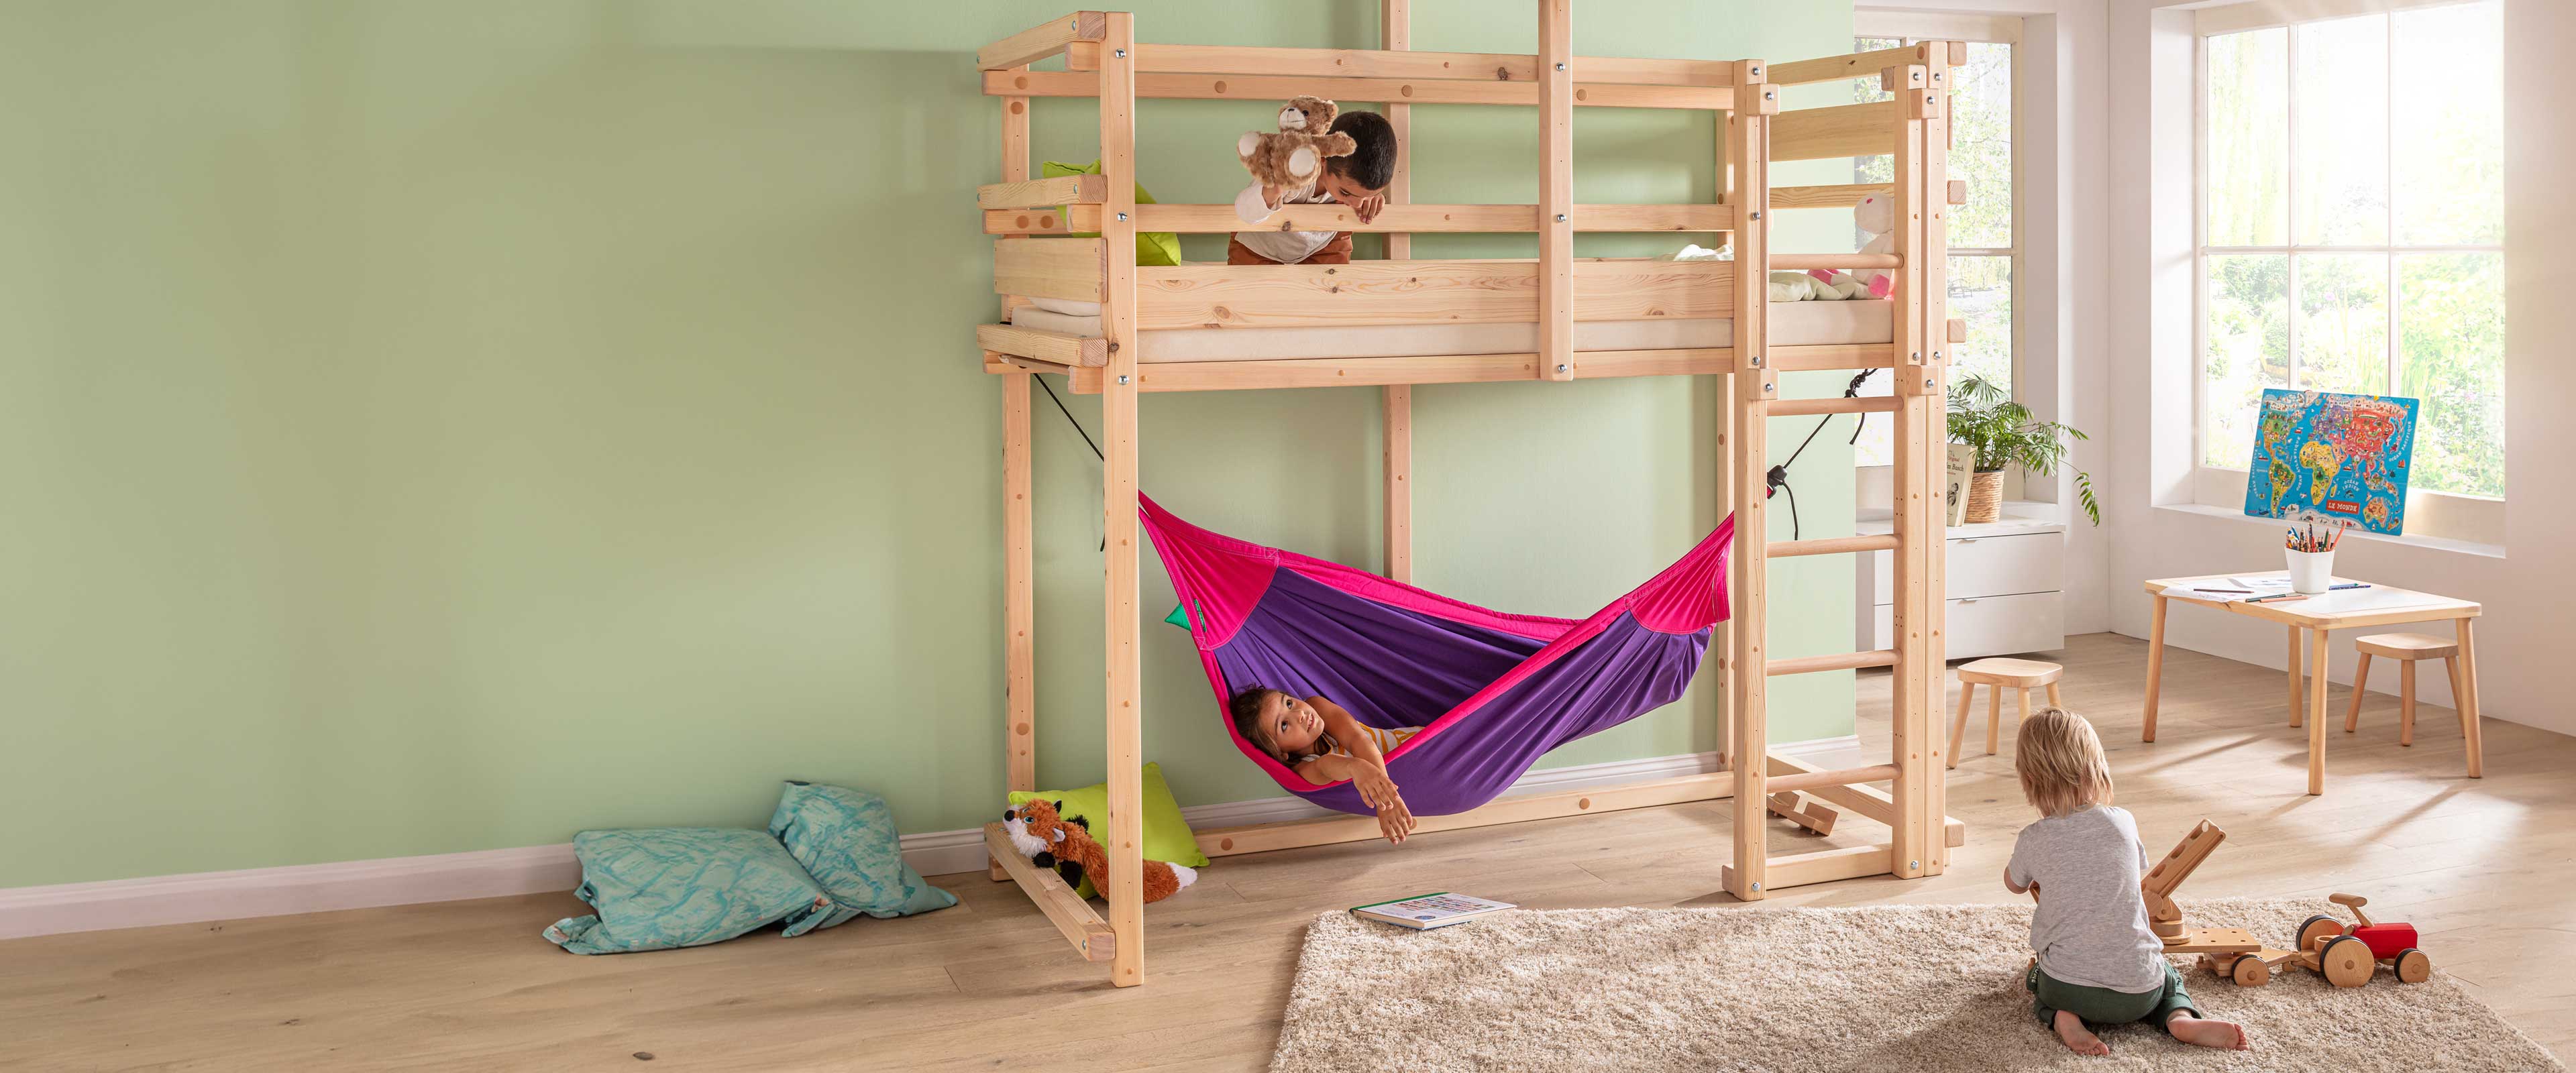 Kids’ beds set to wow